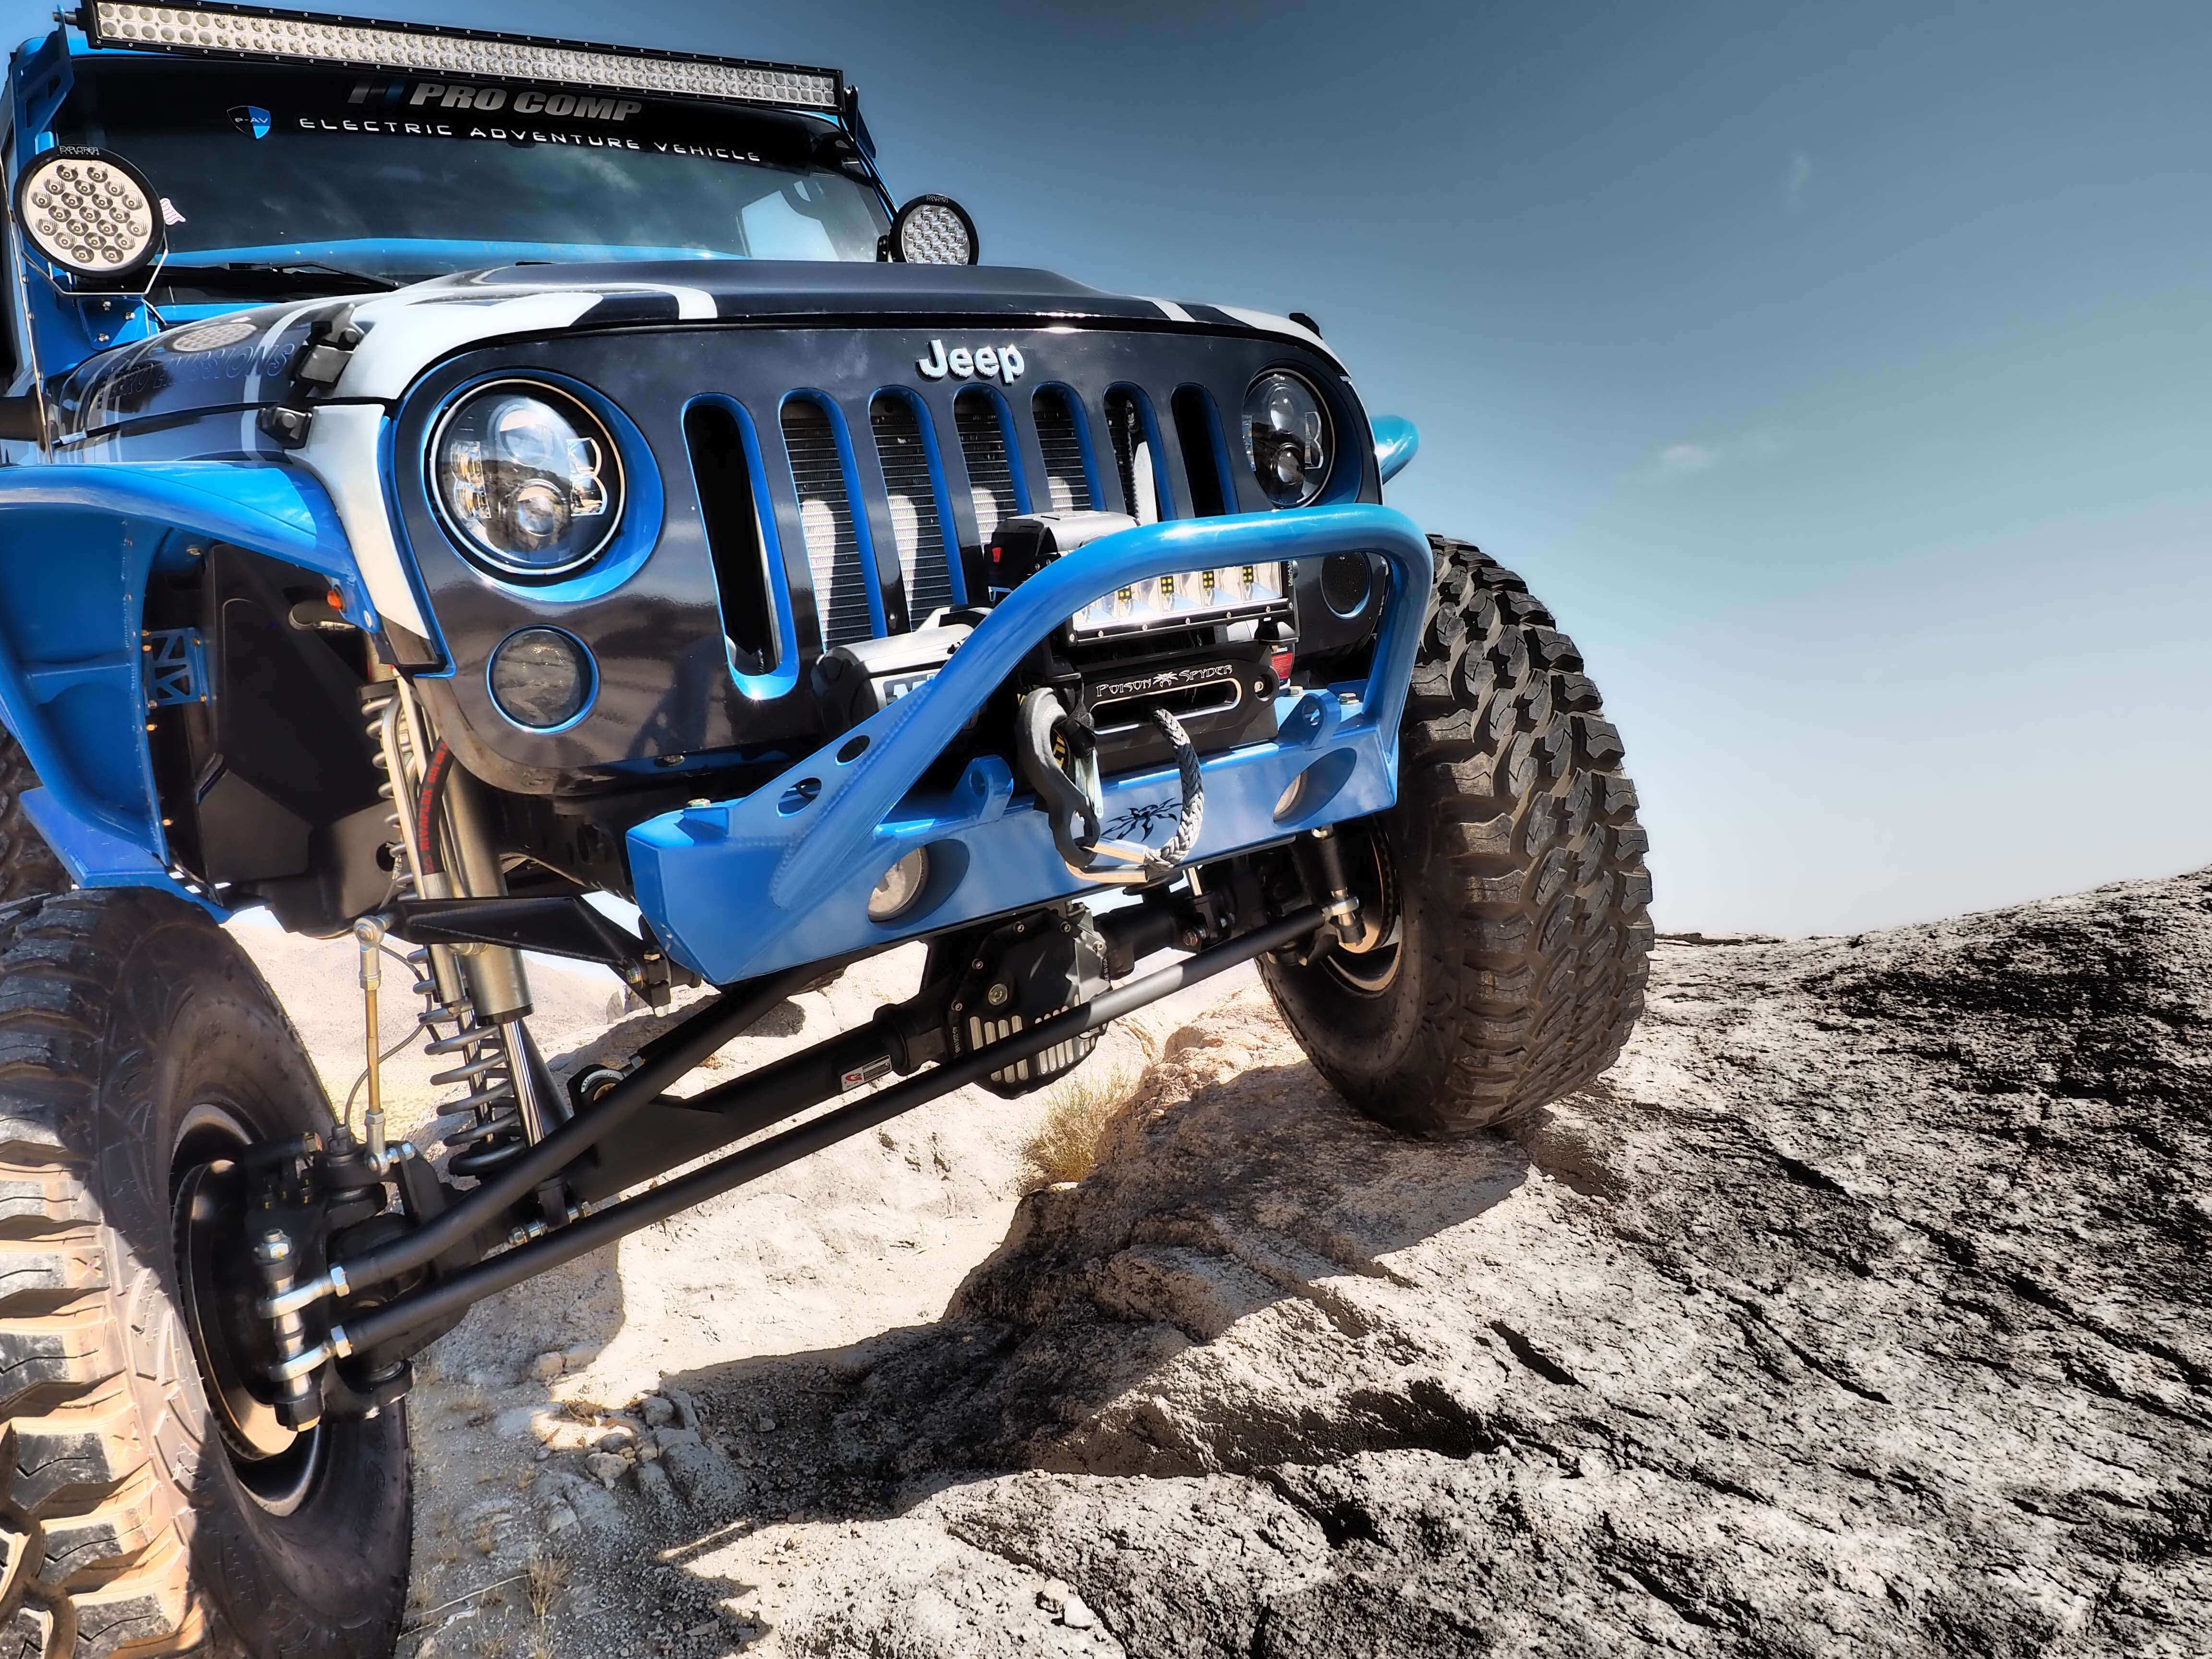 Details About The Electric Powered Jeep JK